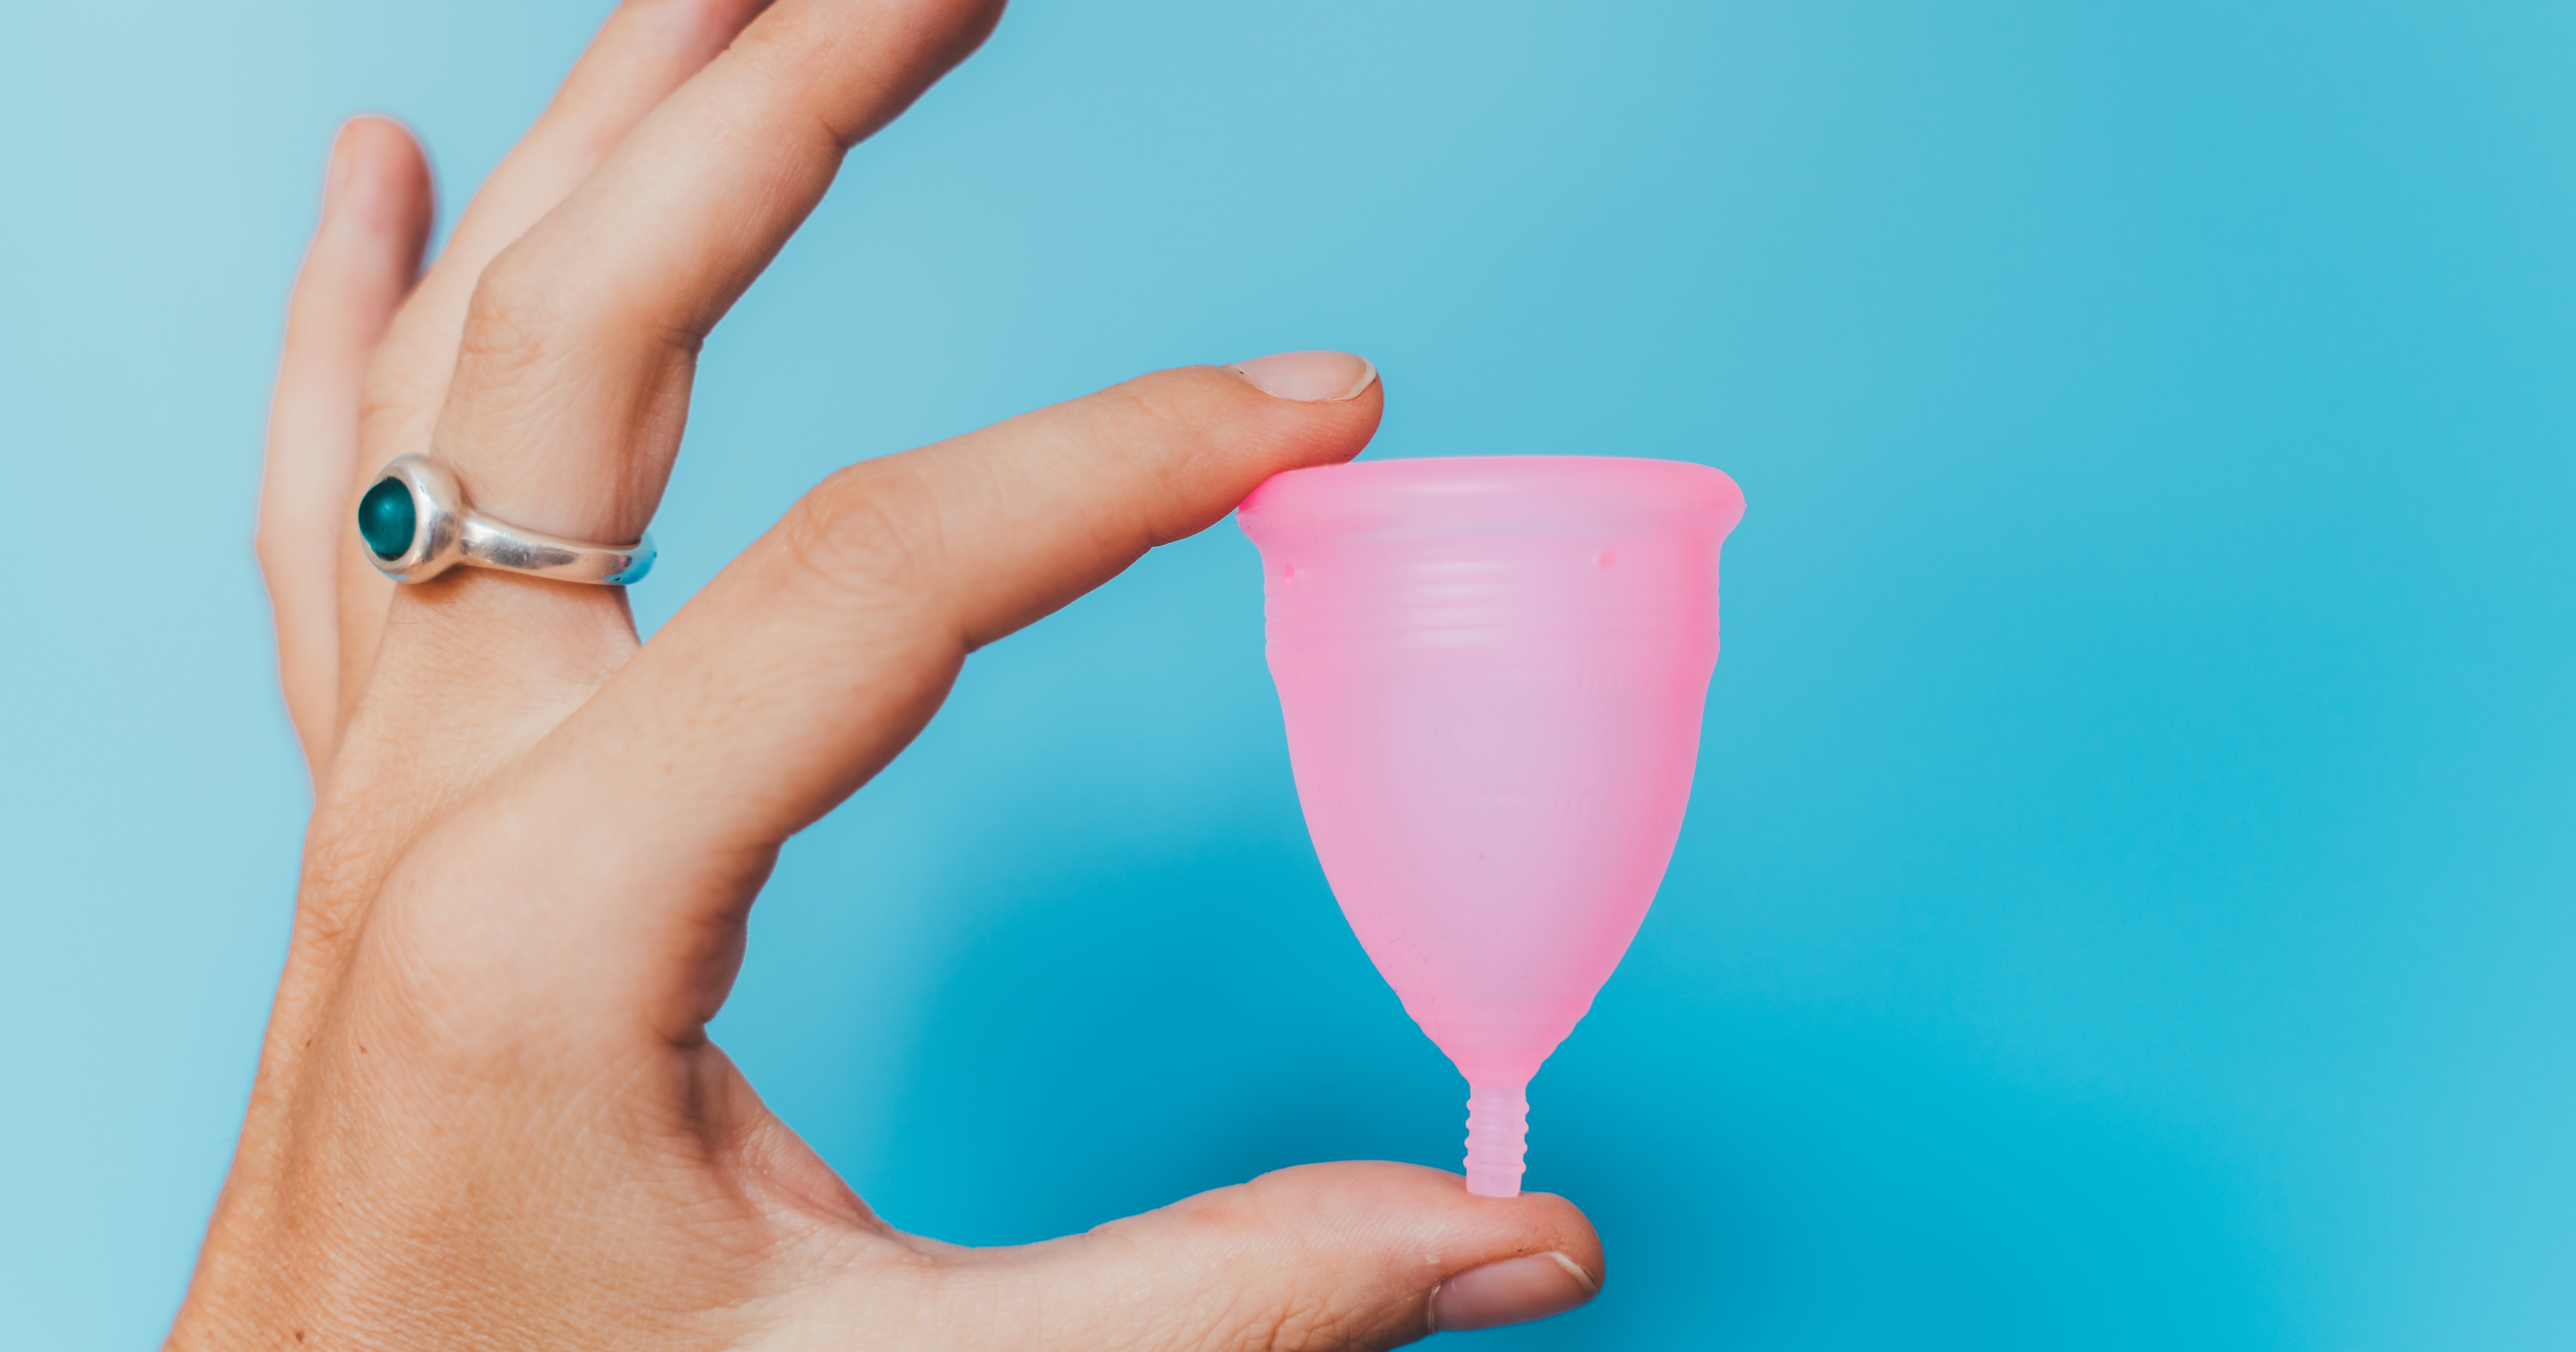 How Often Should You Replace Your Menstrual Cup?